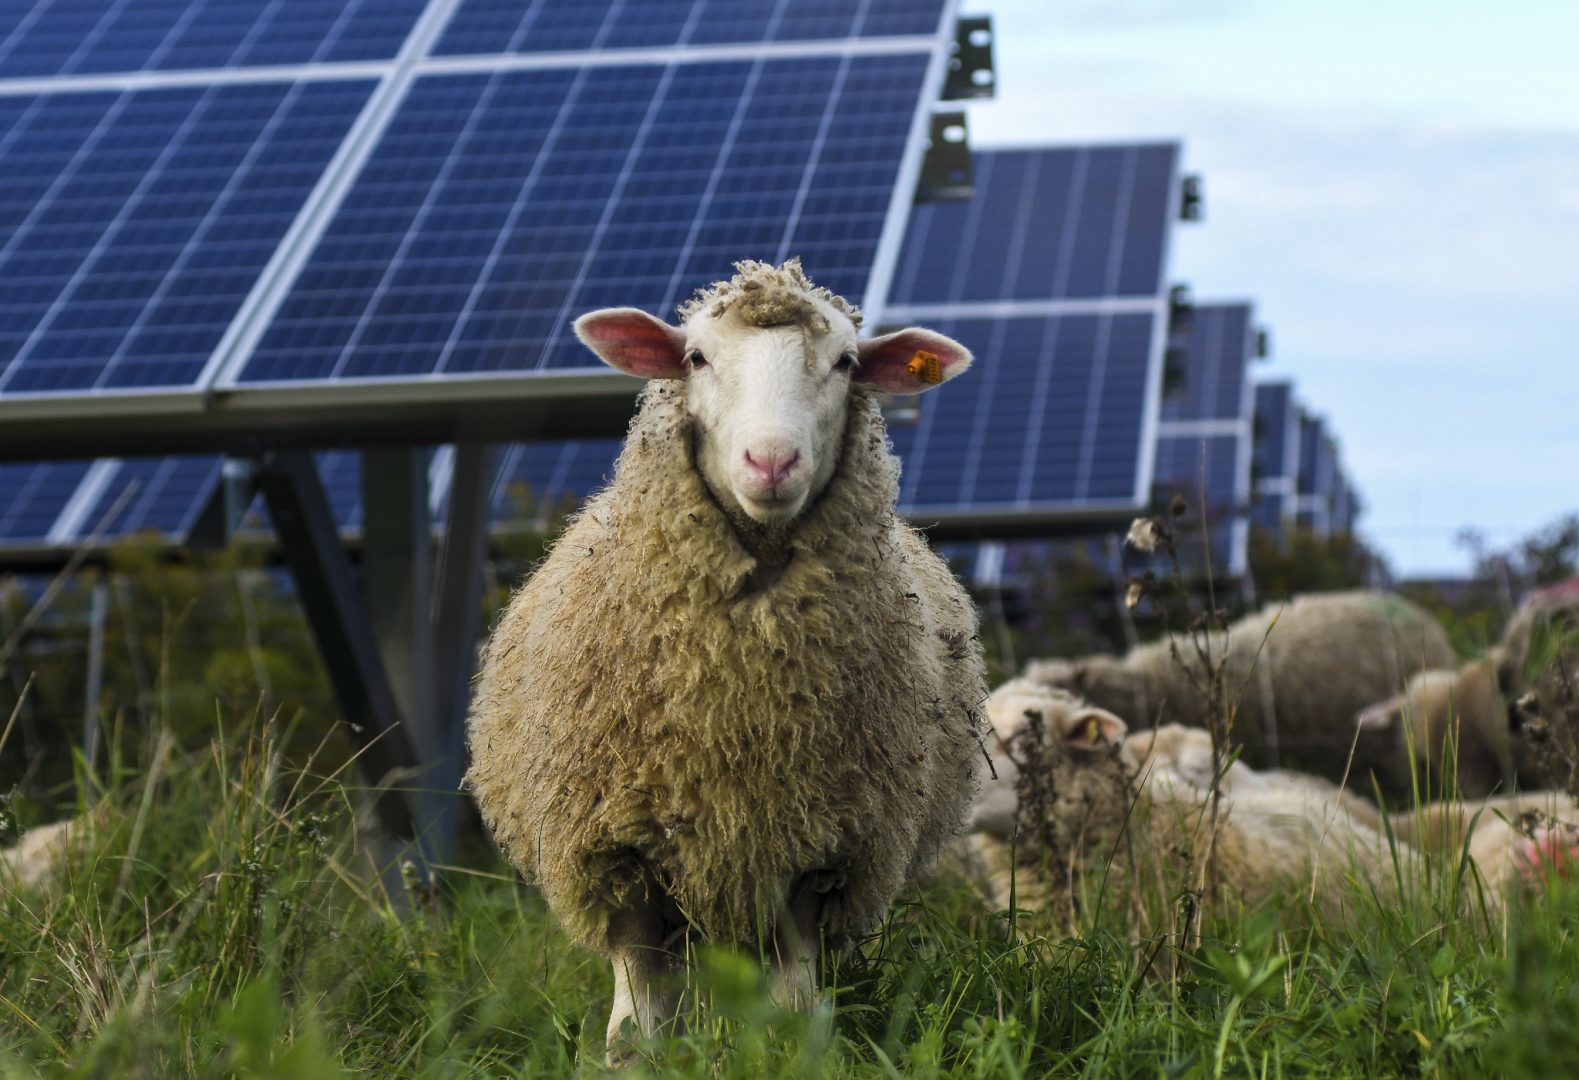 Sheep graze at a solar farm at Cornell University in Ithaca, N.Y., Friday, Sept. 24, 2021. As panels spread across the landscape, the grounds around them can be used for native grasses and flowers that attract pollinators such as bees and butterflies. Some solar farms are being used to graze sheep.